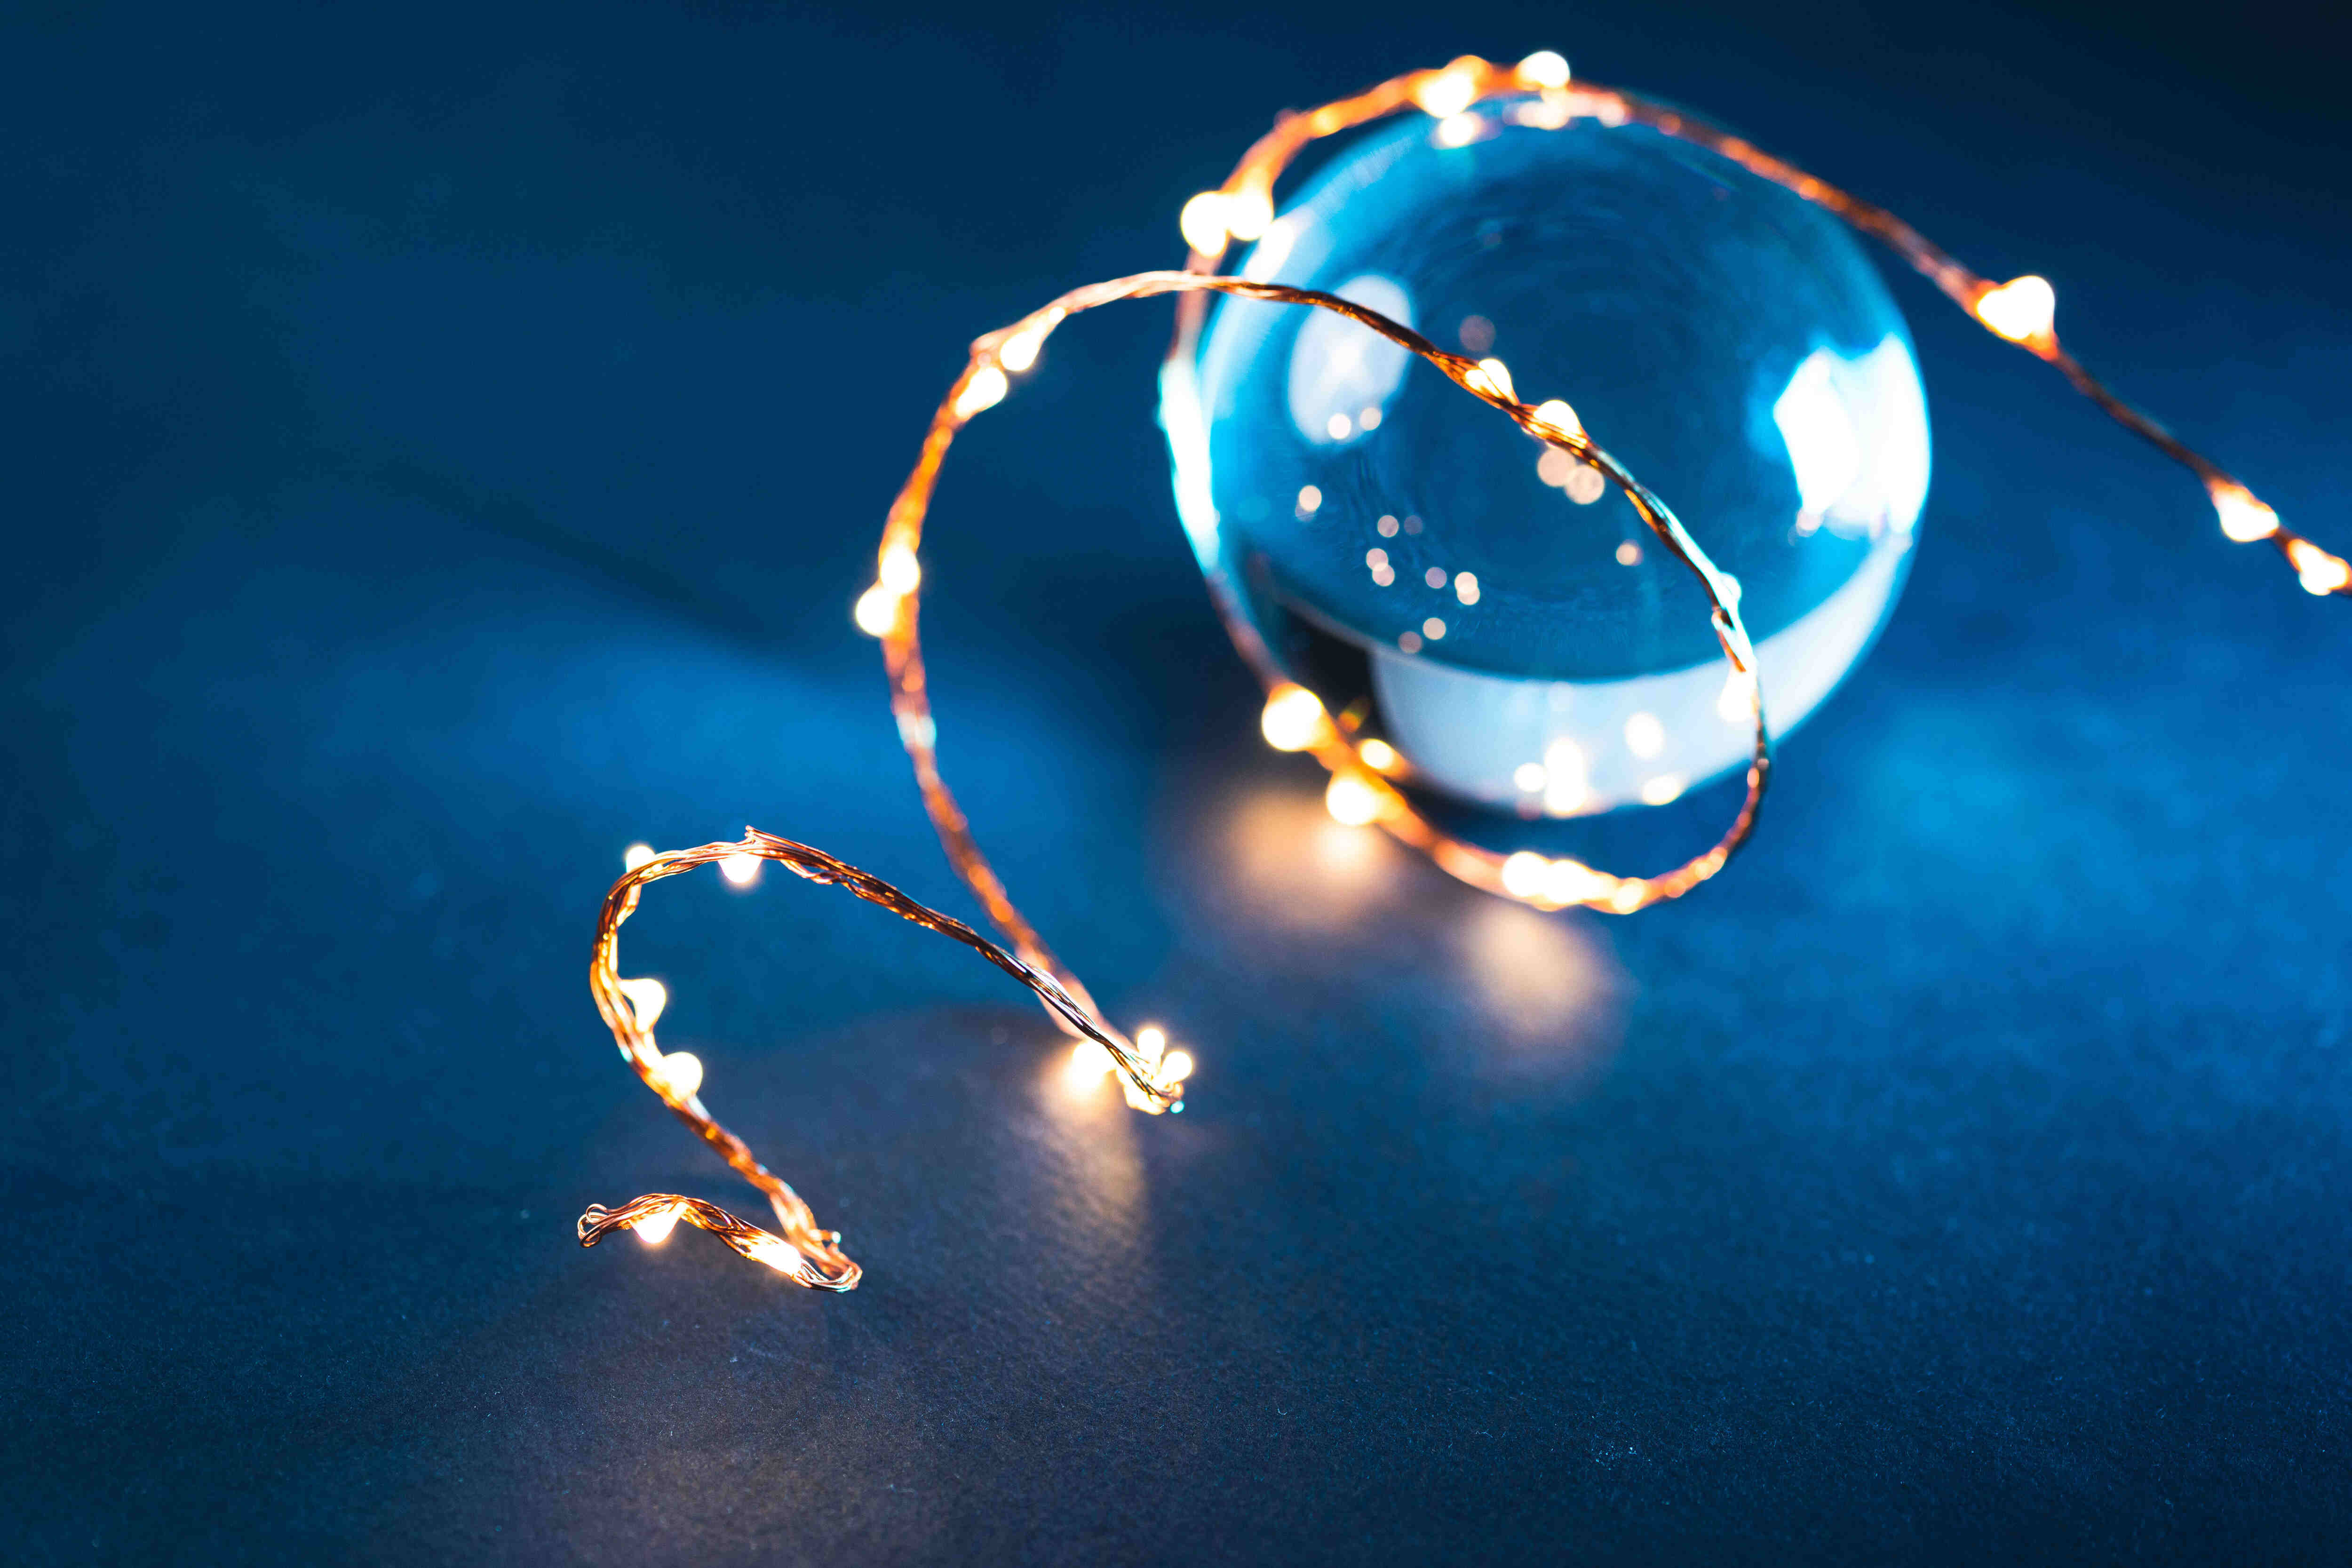 Incorporate some winter wonder by using photos of a glass ball with fairy lights